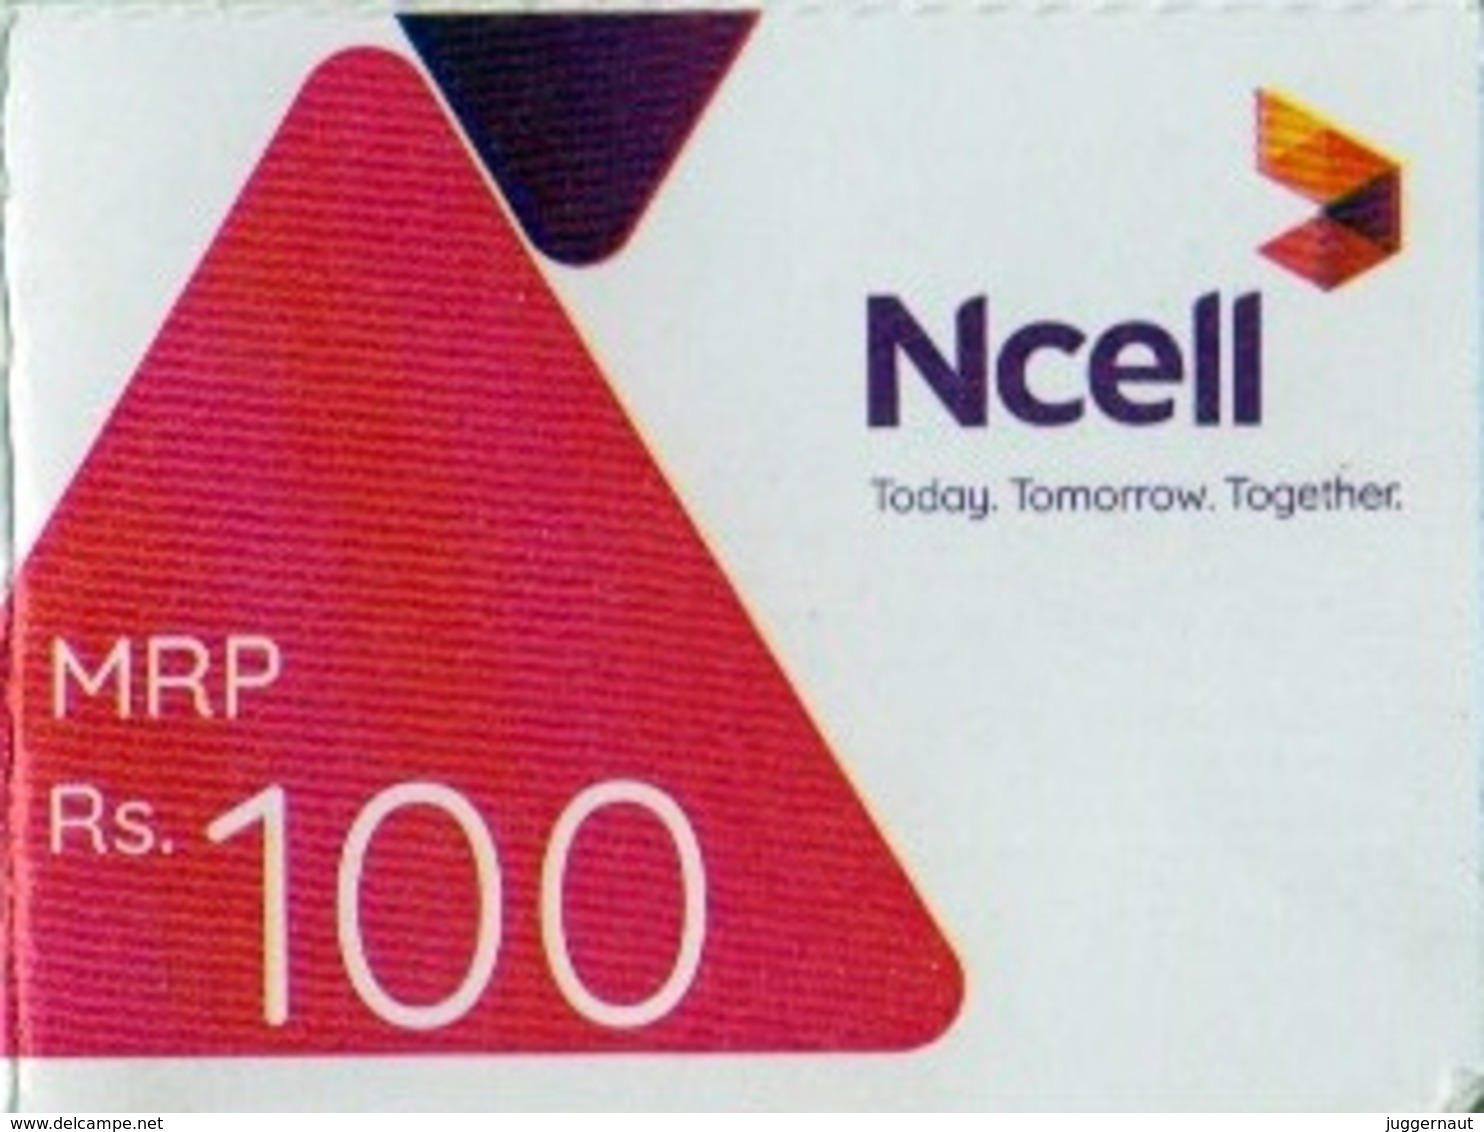 GSM MOBILE Rs.100 PHONE PREPAID USED MINI RECHARGE CARD NCELL MOBILE NEPAL - Nepal